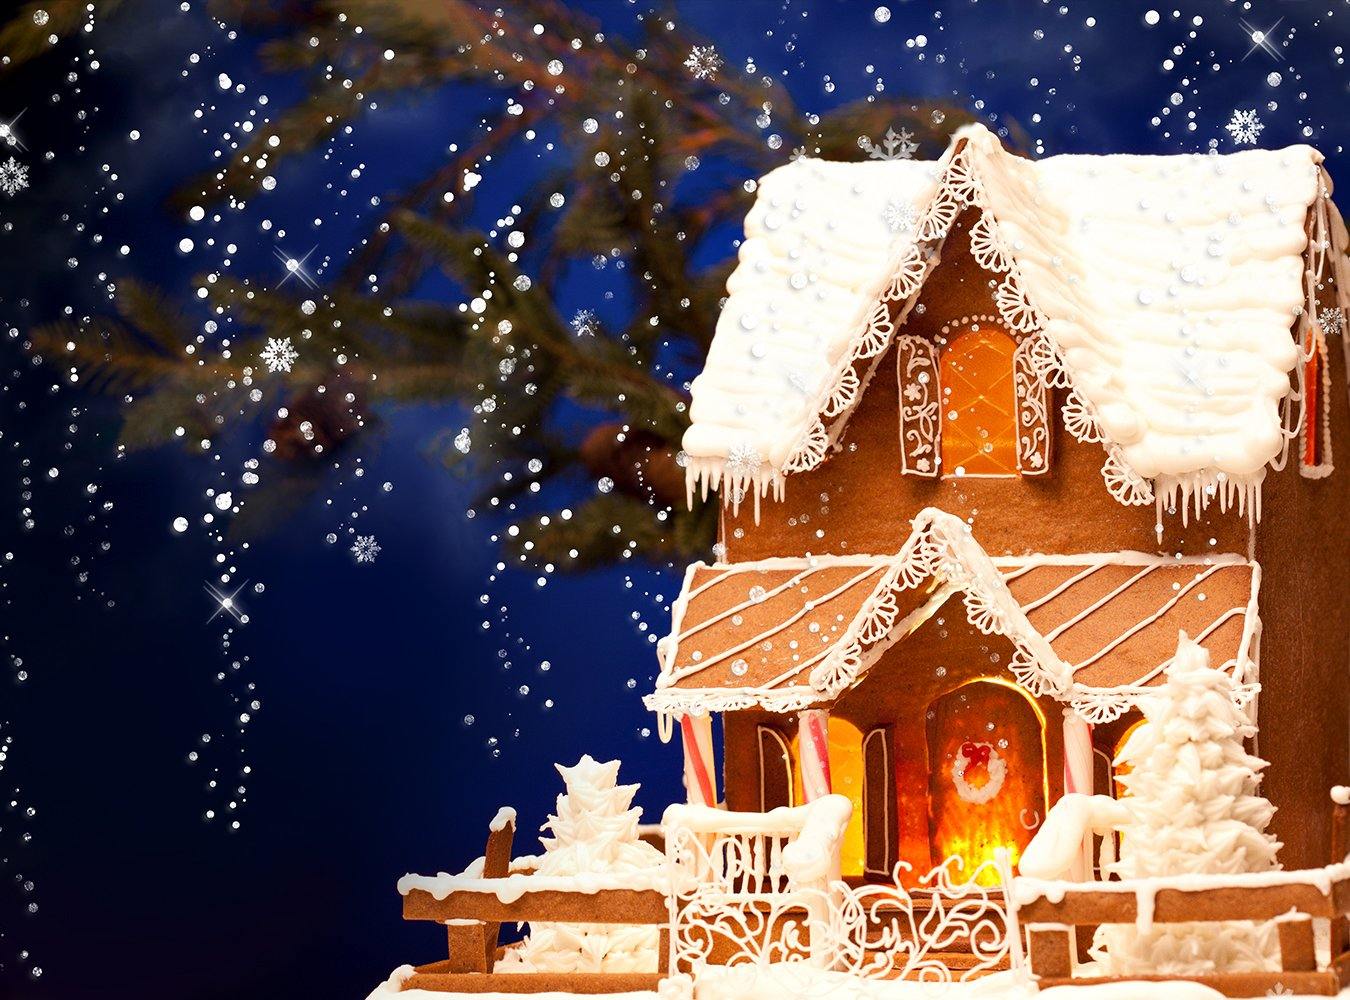 gingerbread background